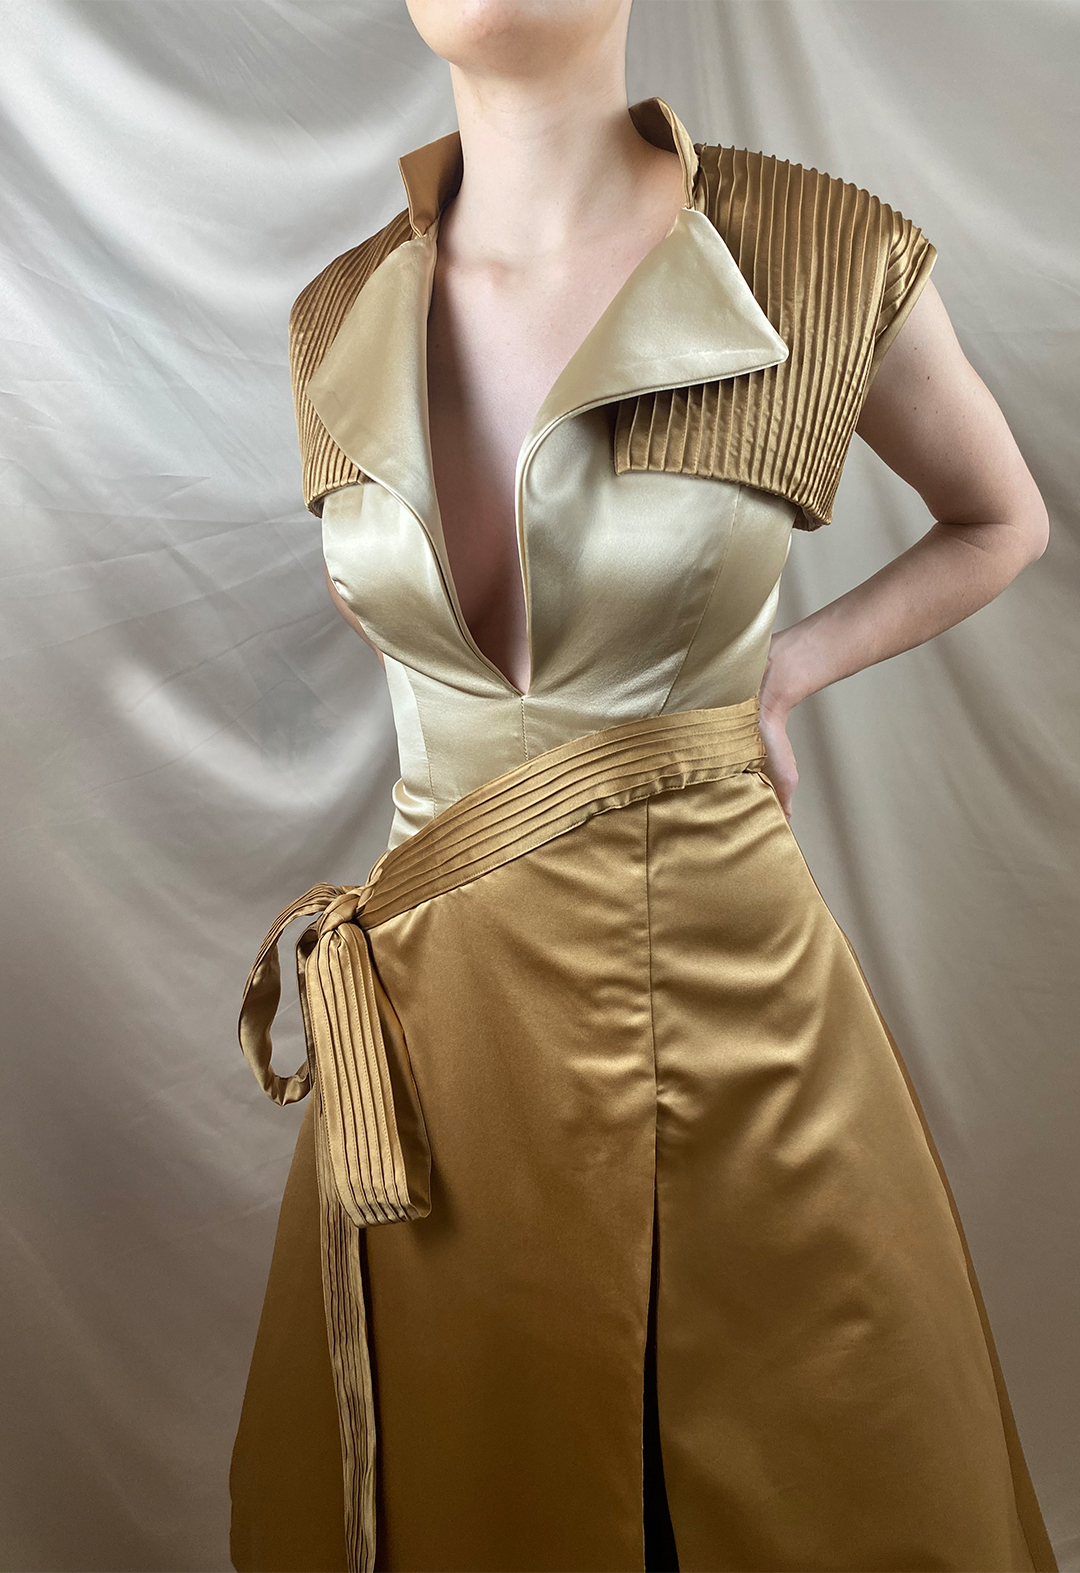 Front close-up shot of the garment. A notched collar bodice with a low neckline and a pin-tucked vest can be seen.